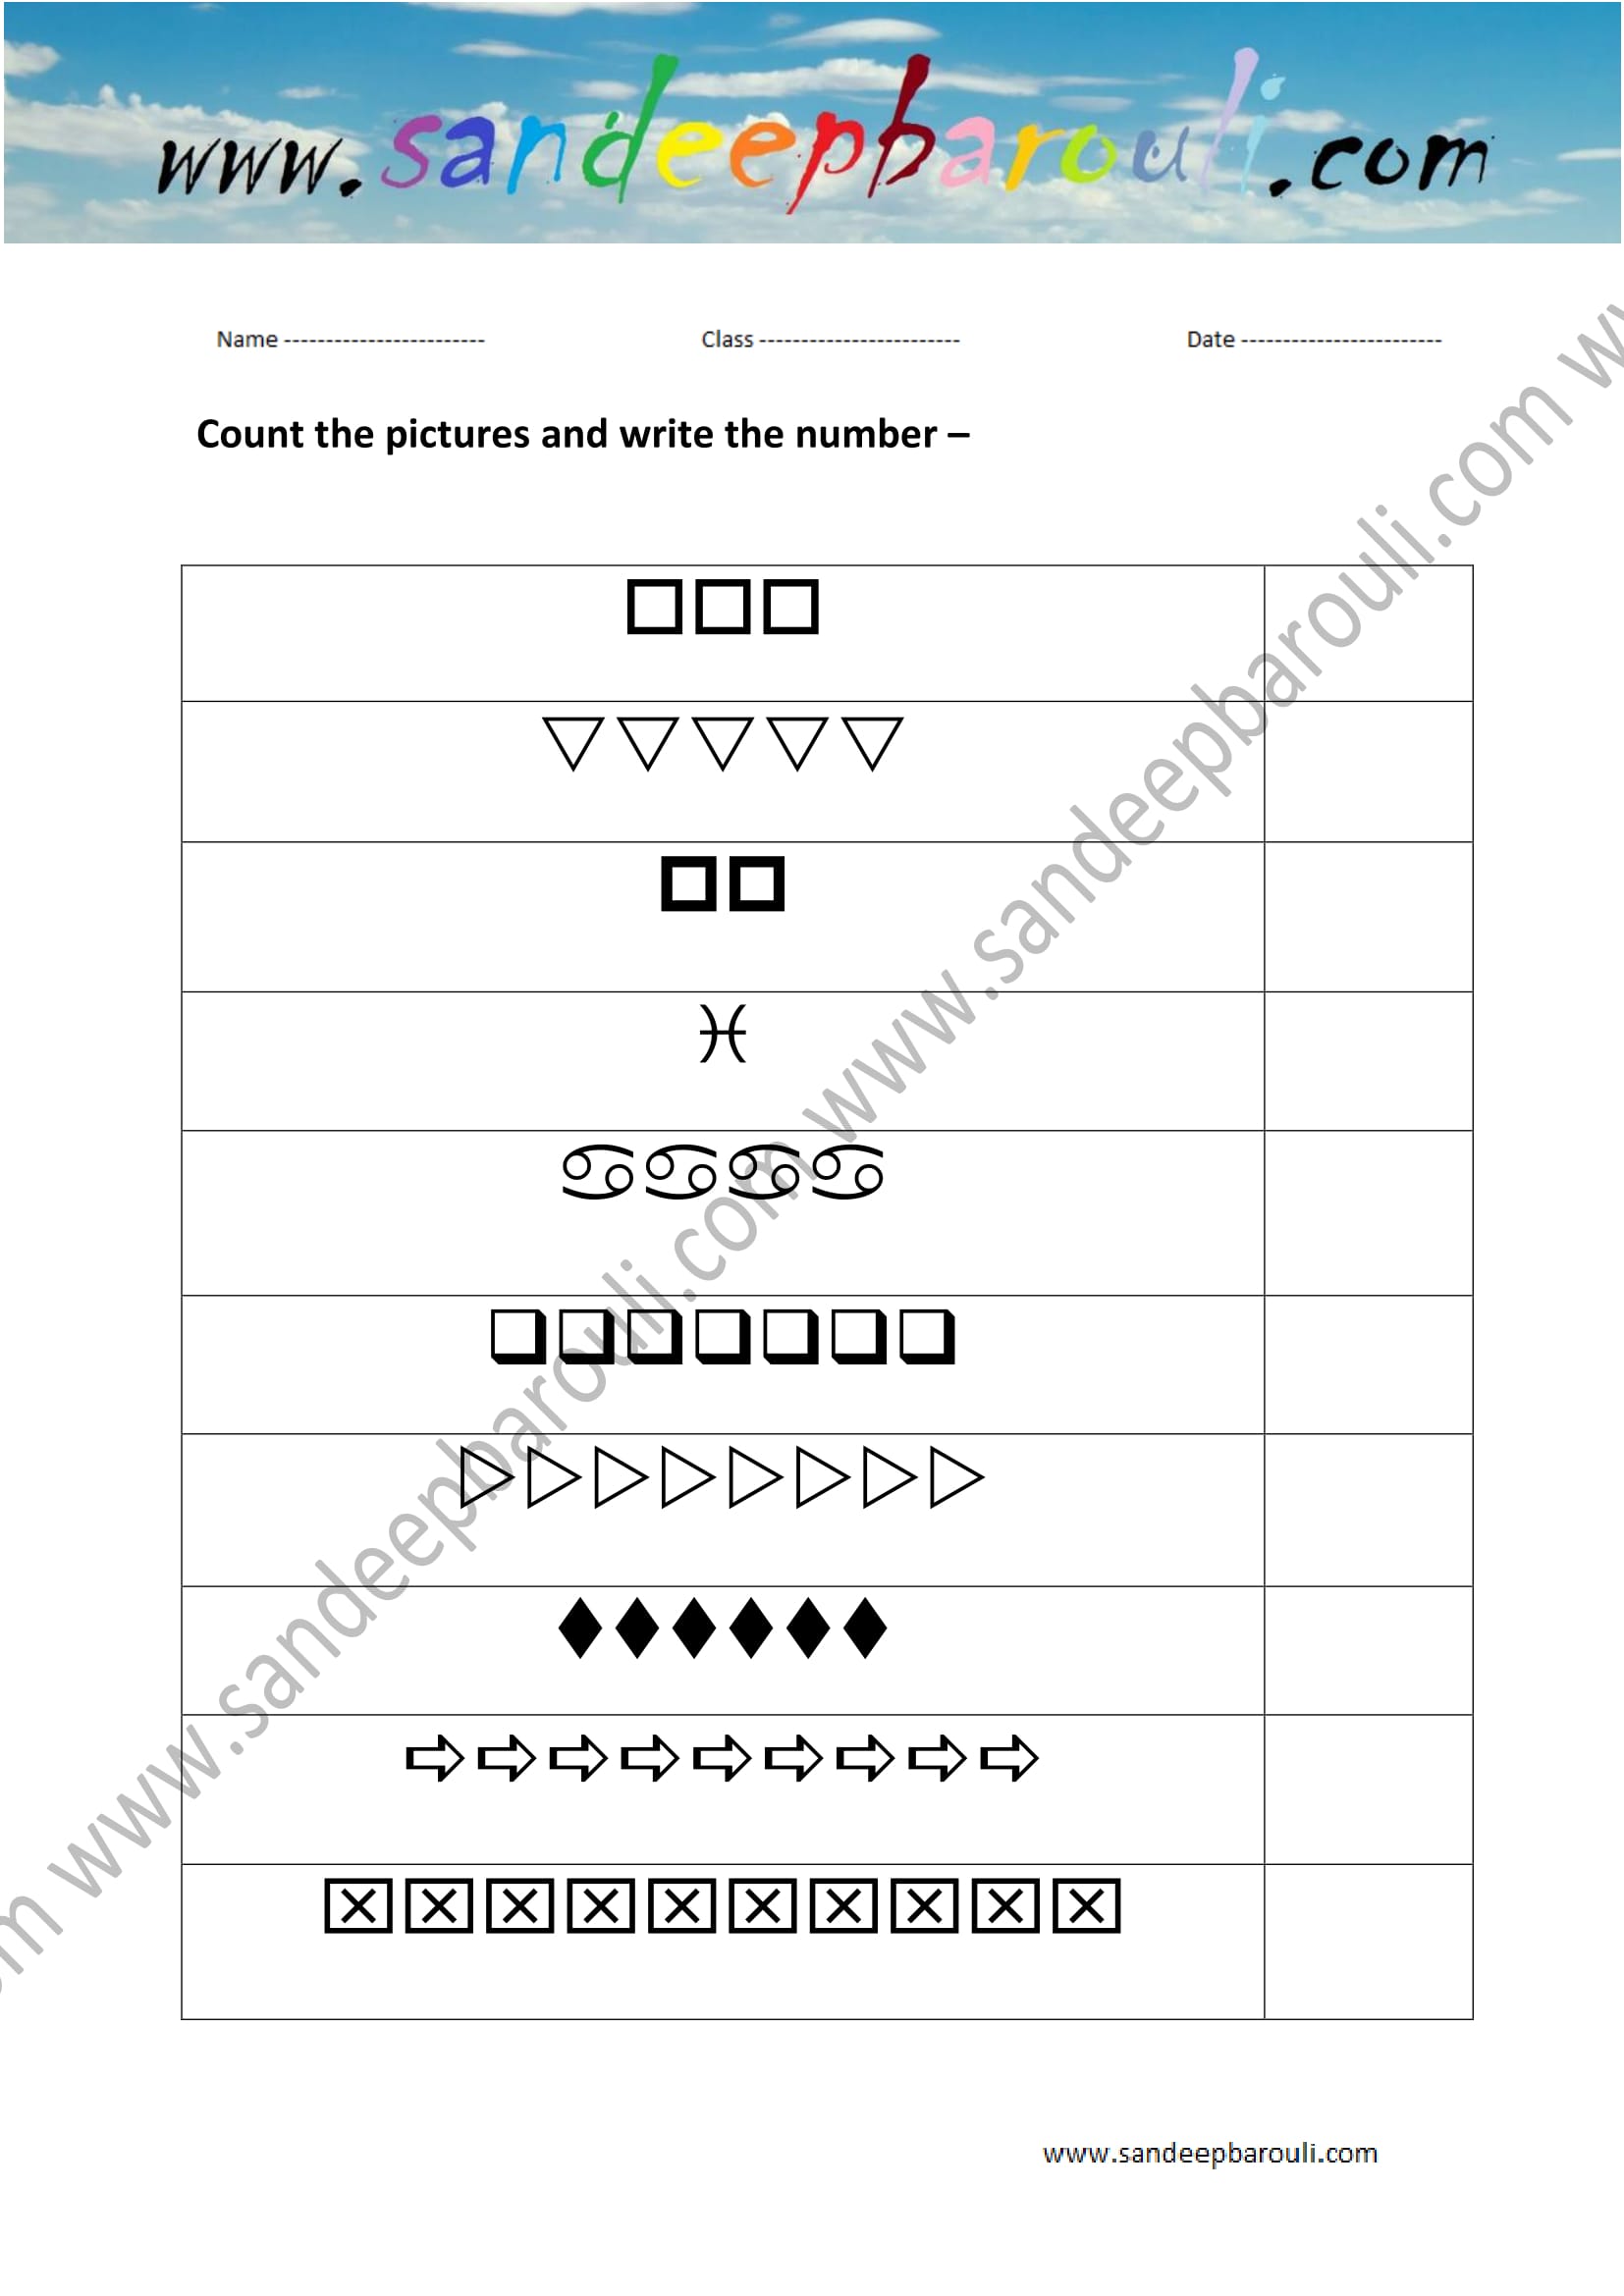 Count the Picture and Write the Number Worksheet (5)